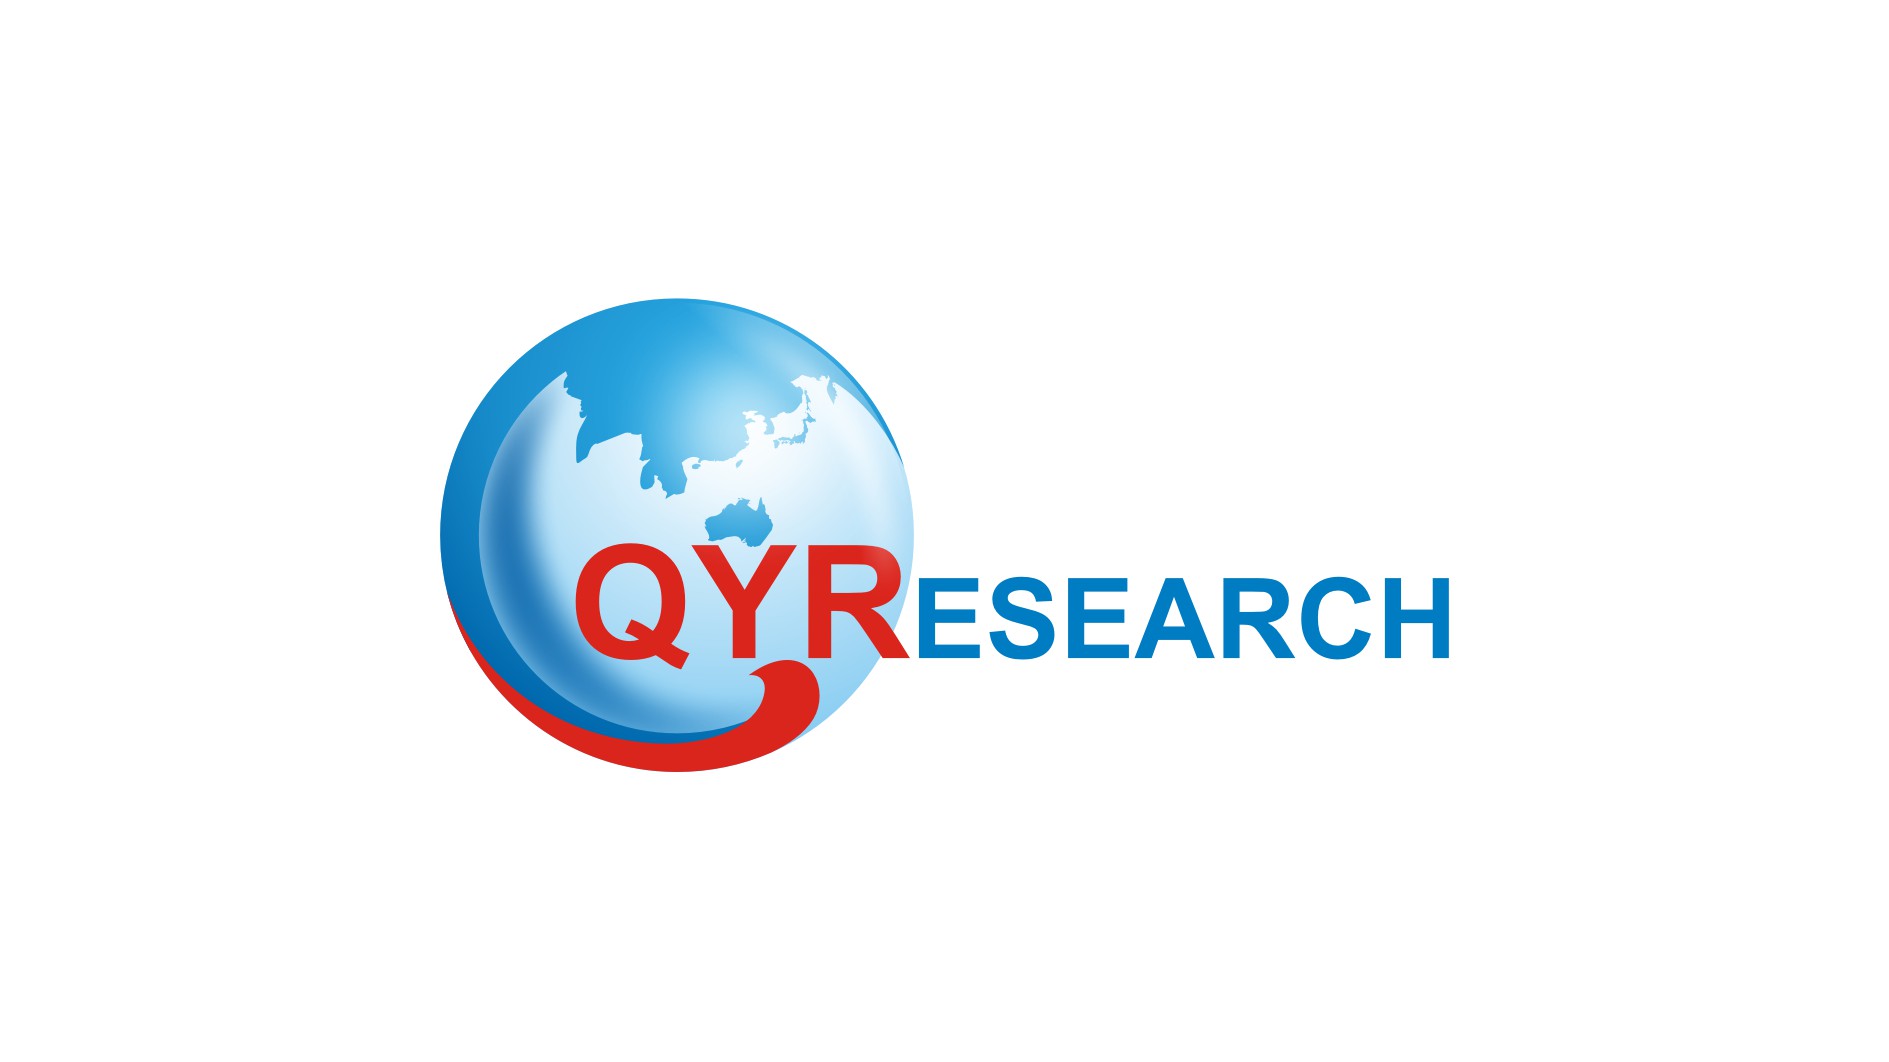 Global Life Science & Analytical Instruments market 2019 – 2025 analysis examined in new market research report